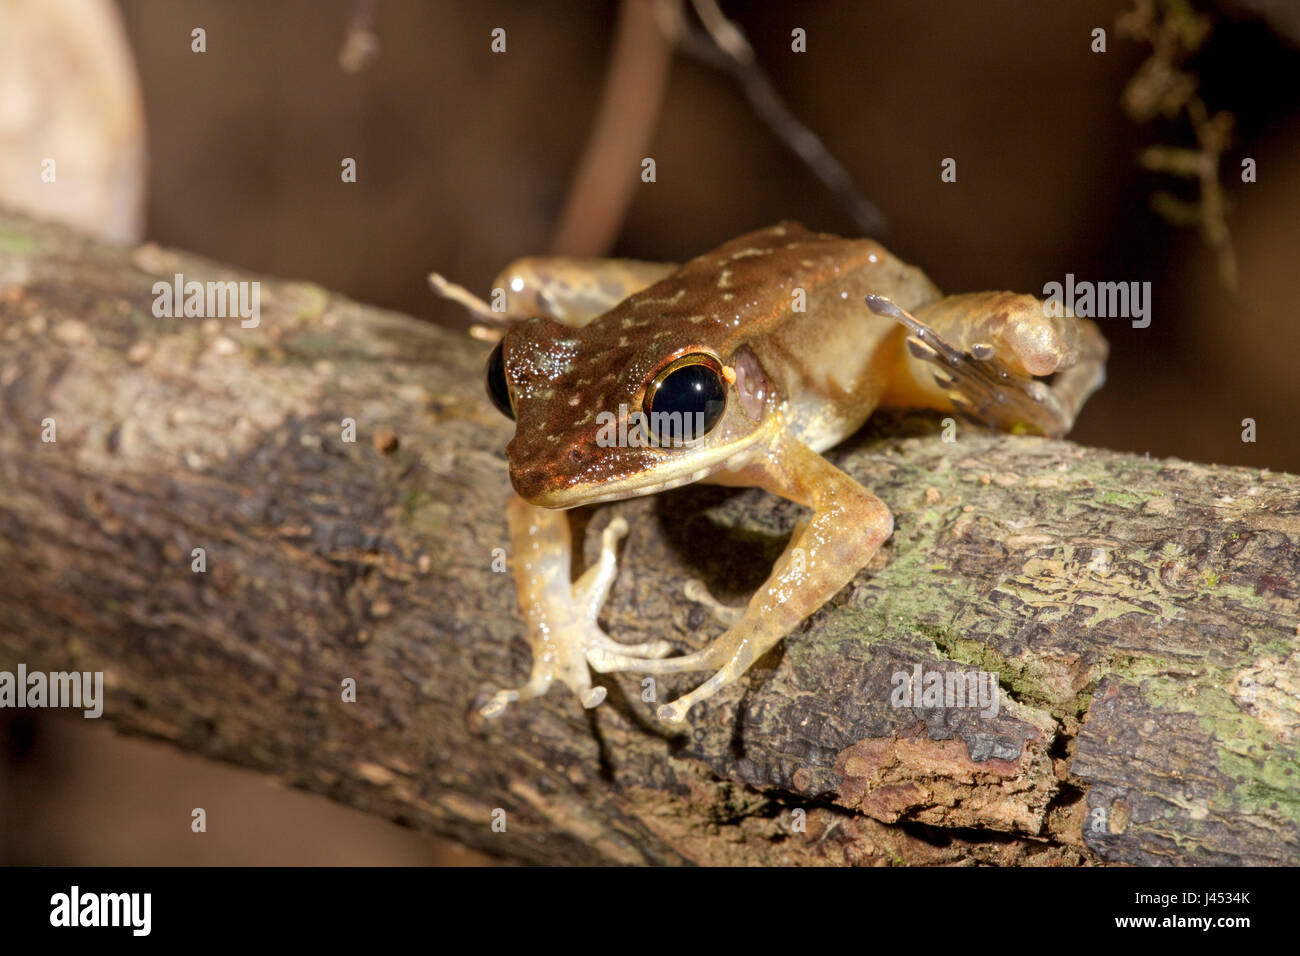 photo of a Northern torrent frog on a branch Stock Photo